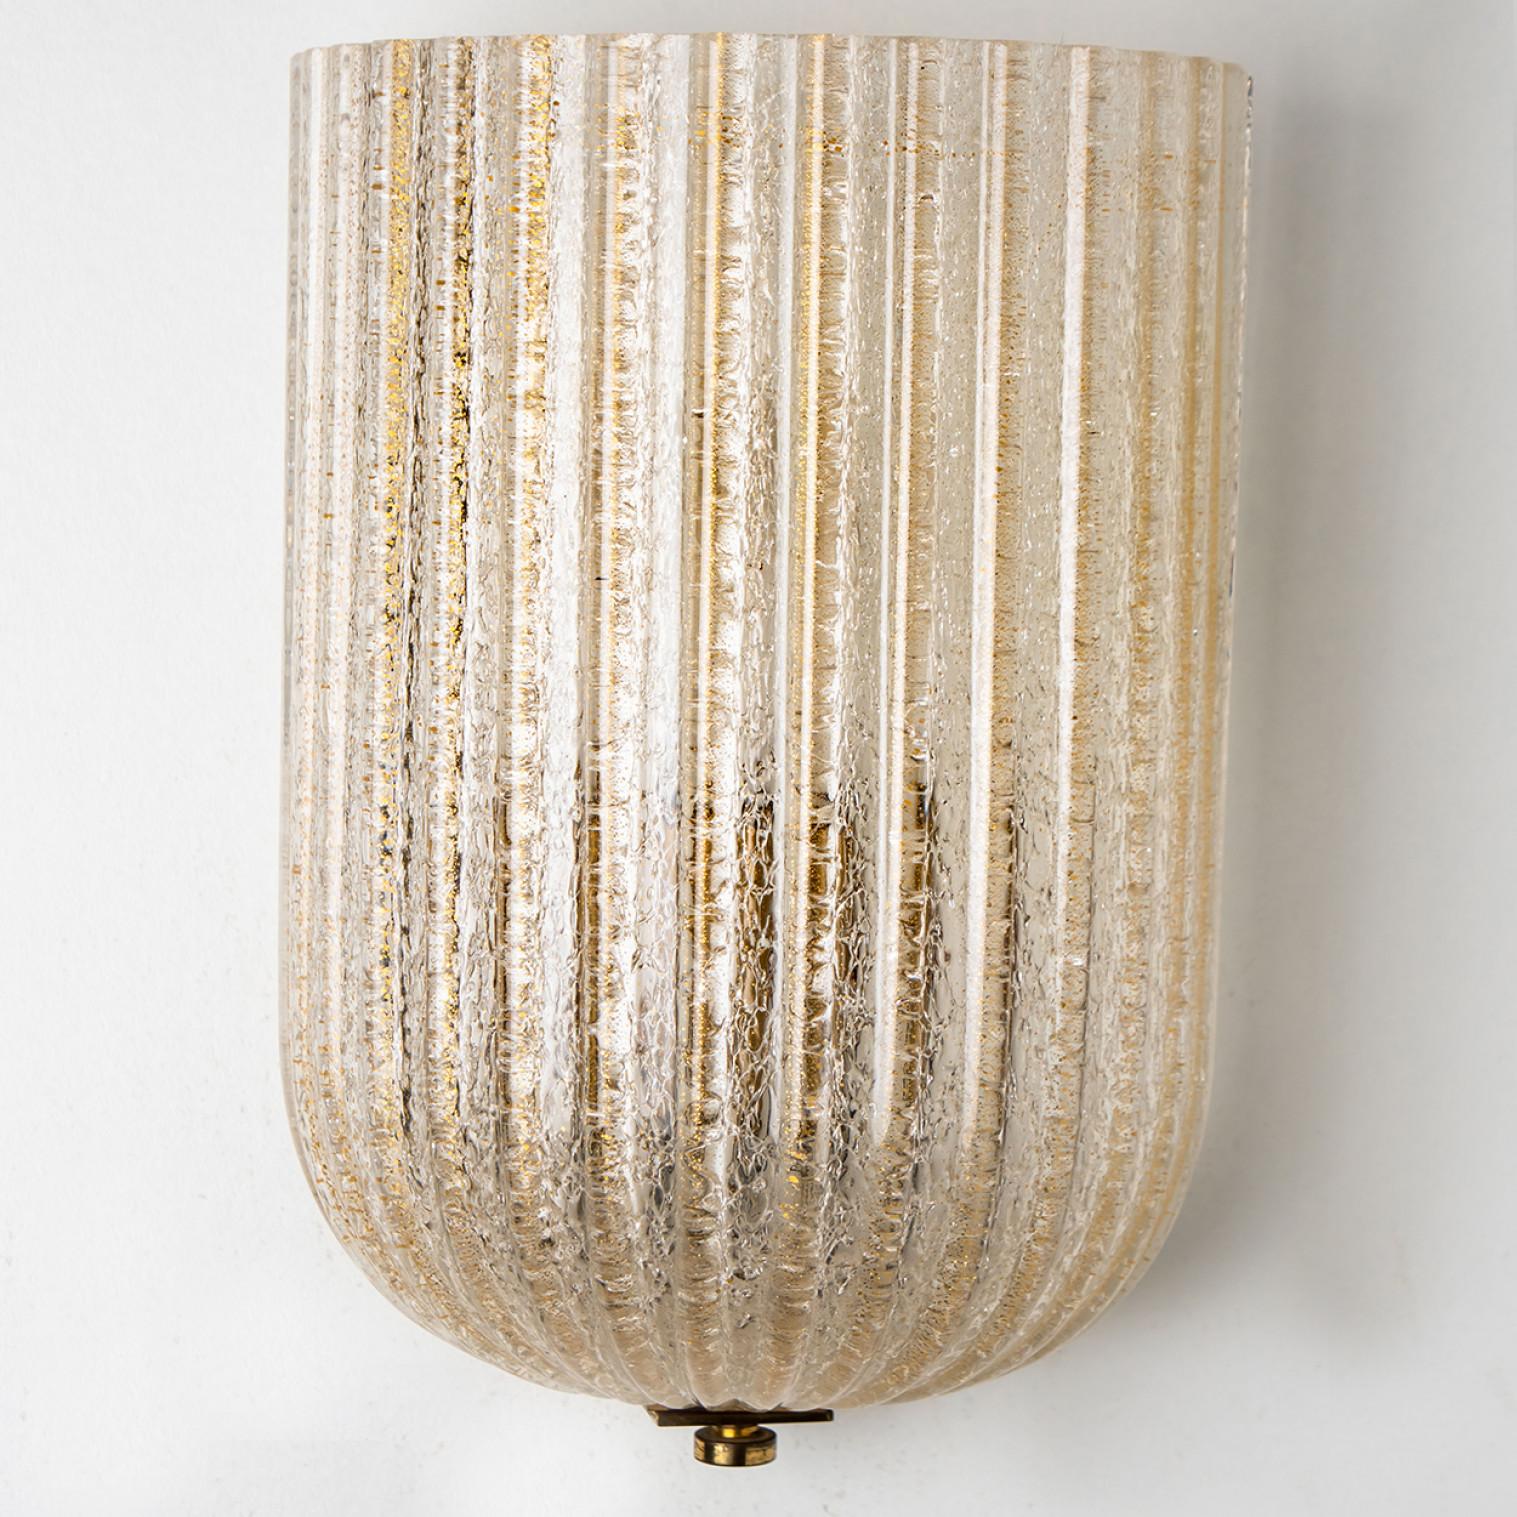 1 of 2 Fluted Murano Glass Wall Sconces Barovier, Italy, 1960s For Sale 1